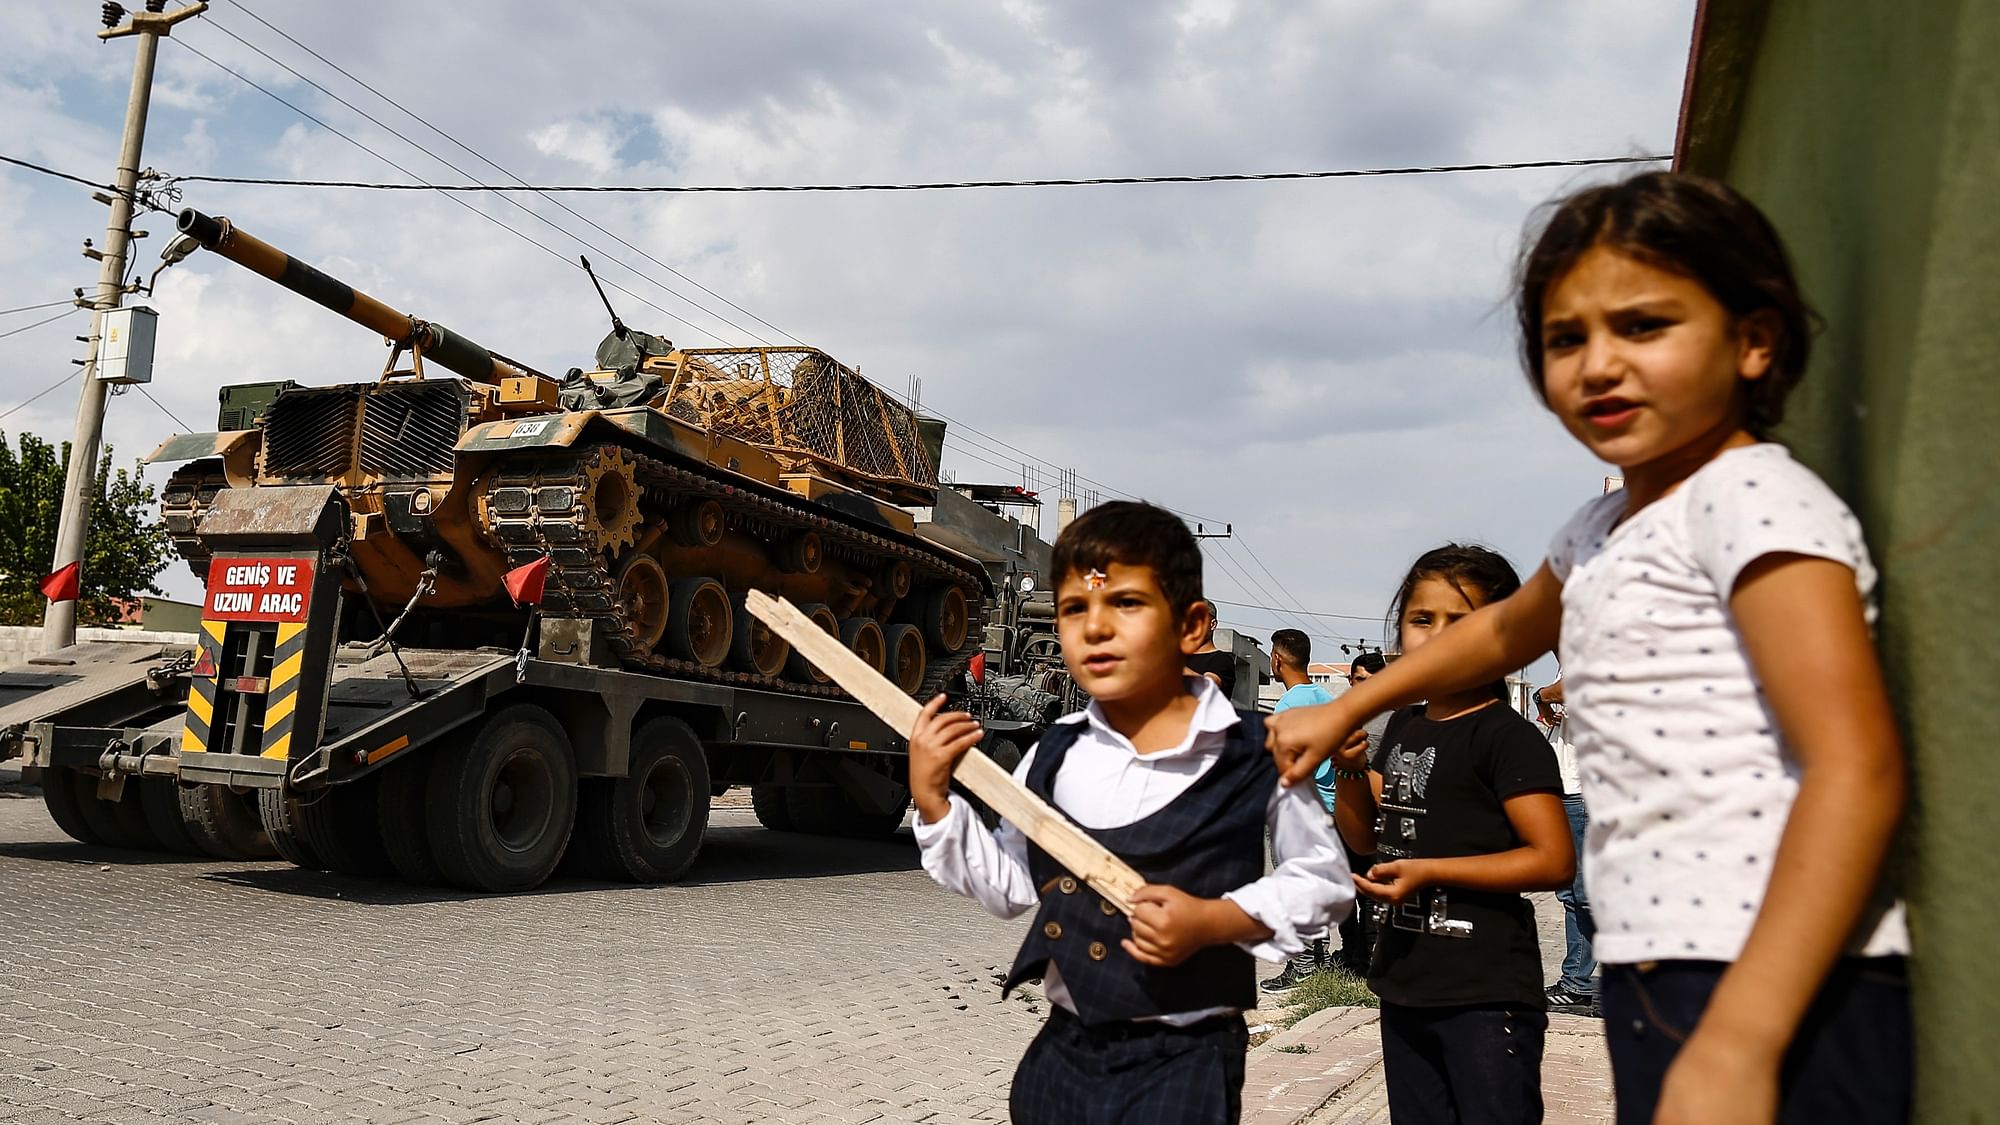 Children watch as Army tanks are transported on trucks in the outskirts of the town of Akcakale, in Sanliurfa province, southeastern Turkey, at he border of Syria.&nbsp;